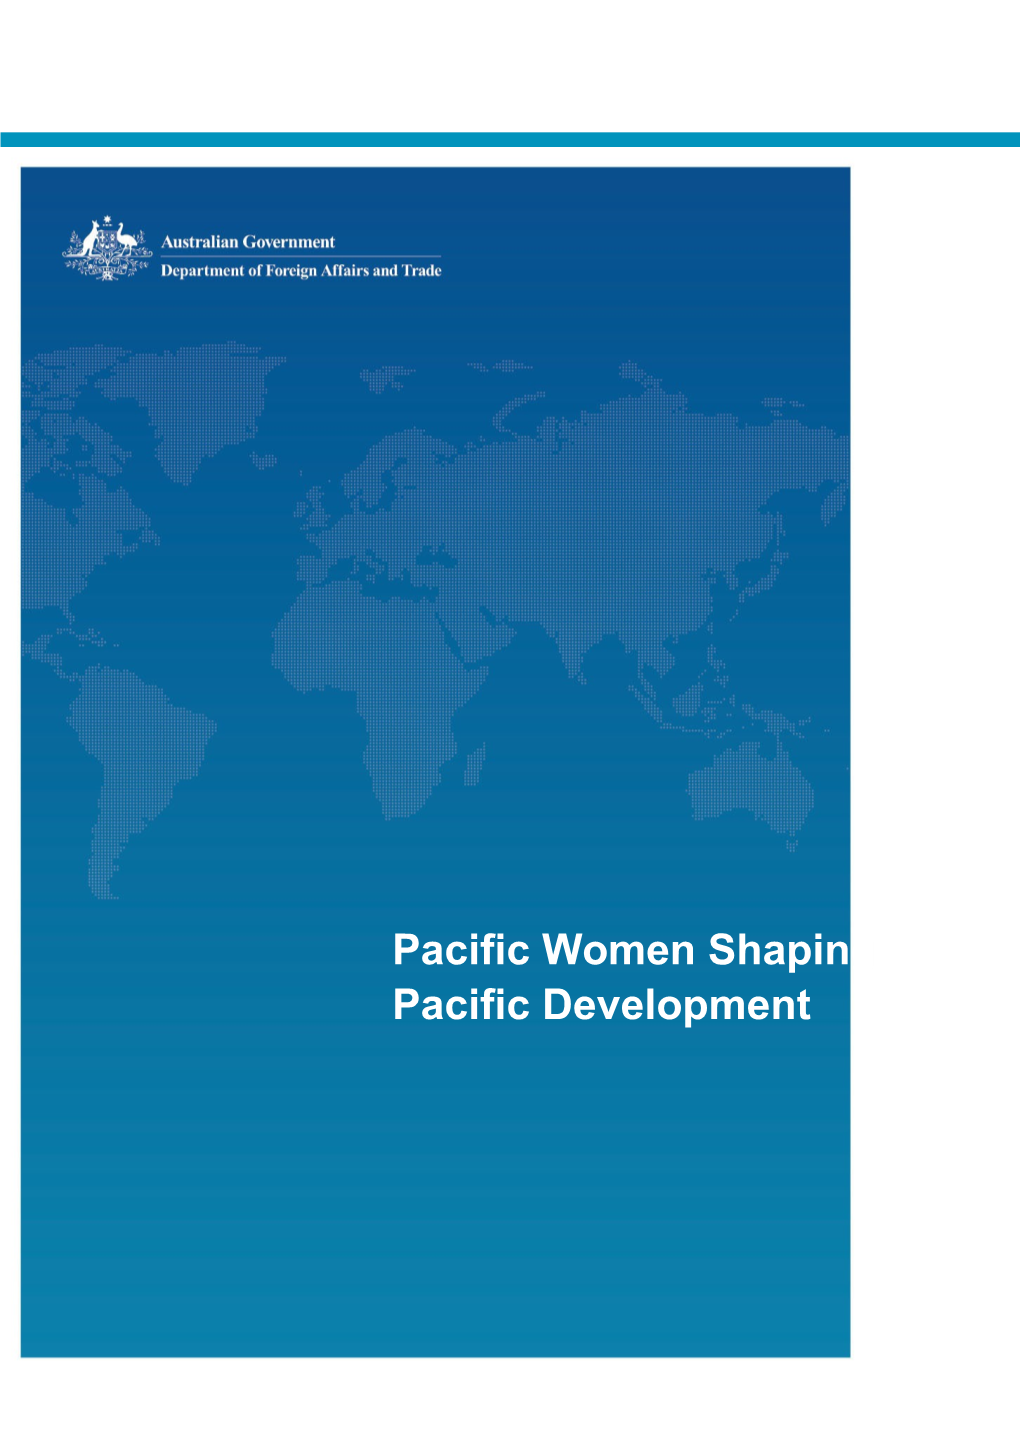 Pacific Women Shaping Pacific Development: Cook Islands Country Plan Summary